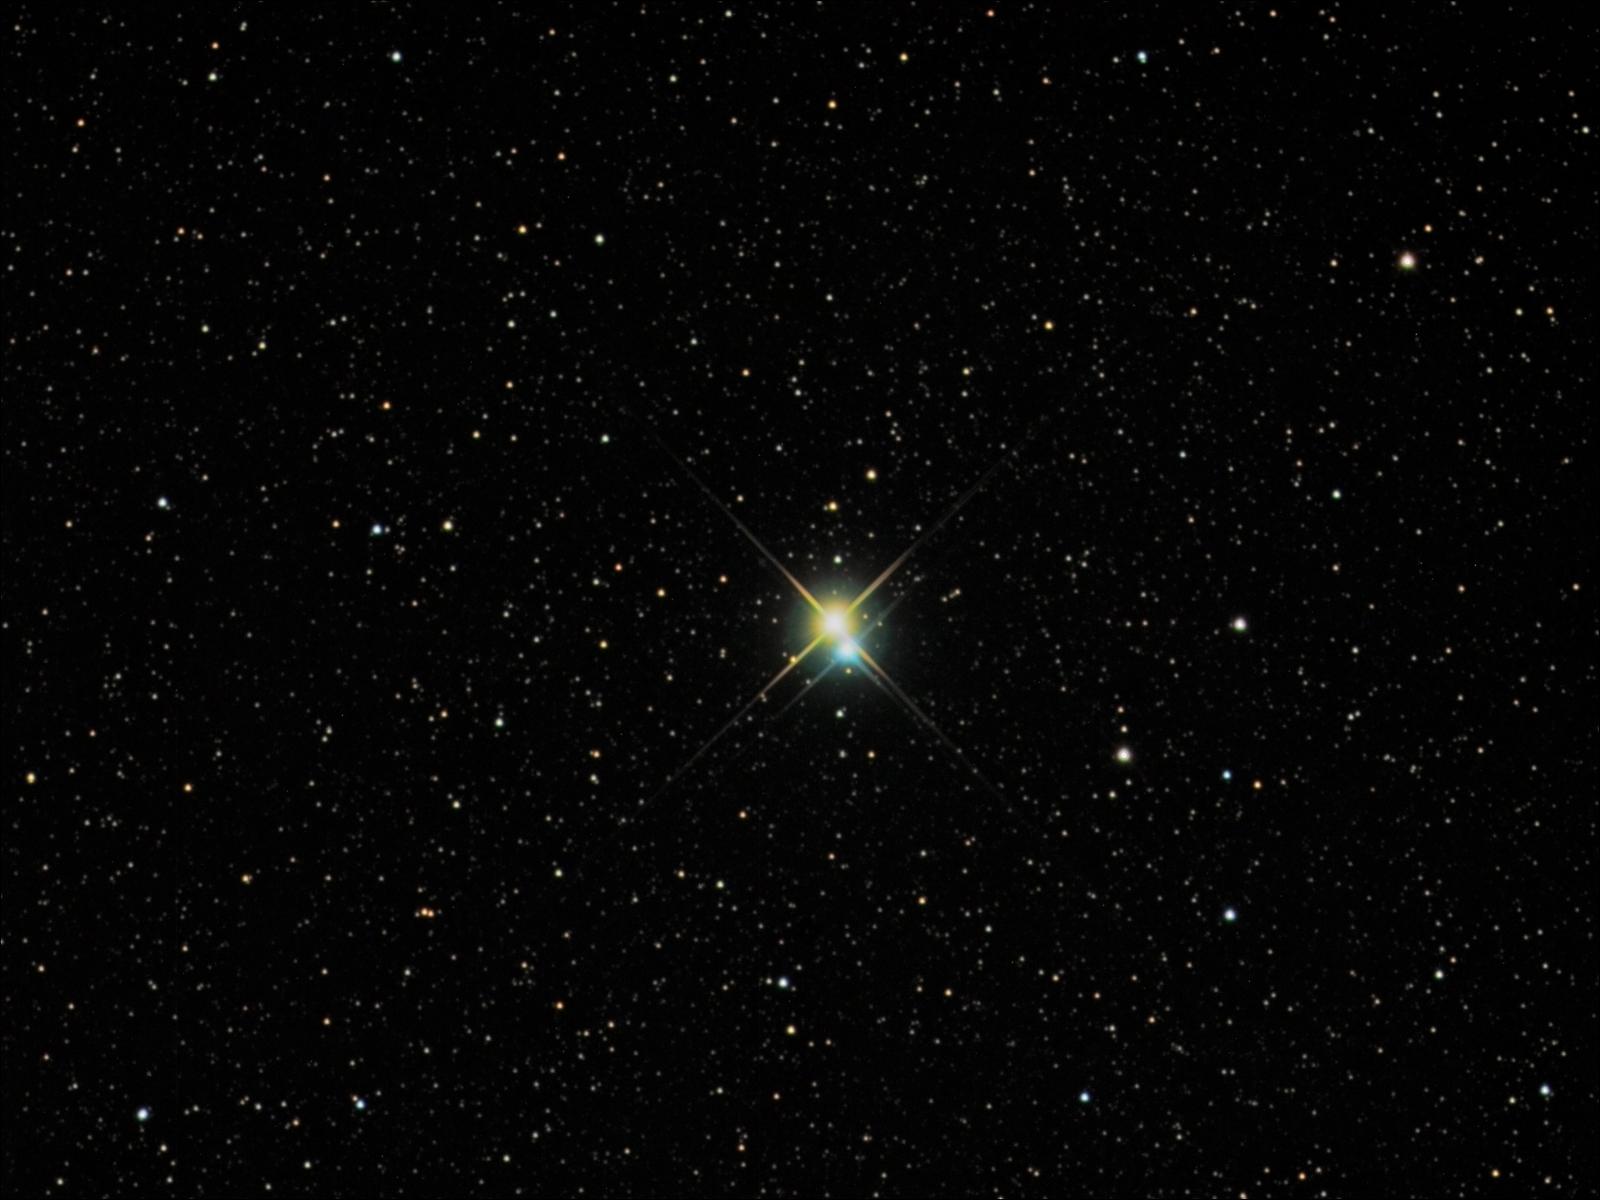 The Double Star Albireo in the constellation of Cygnus